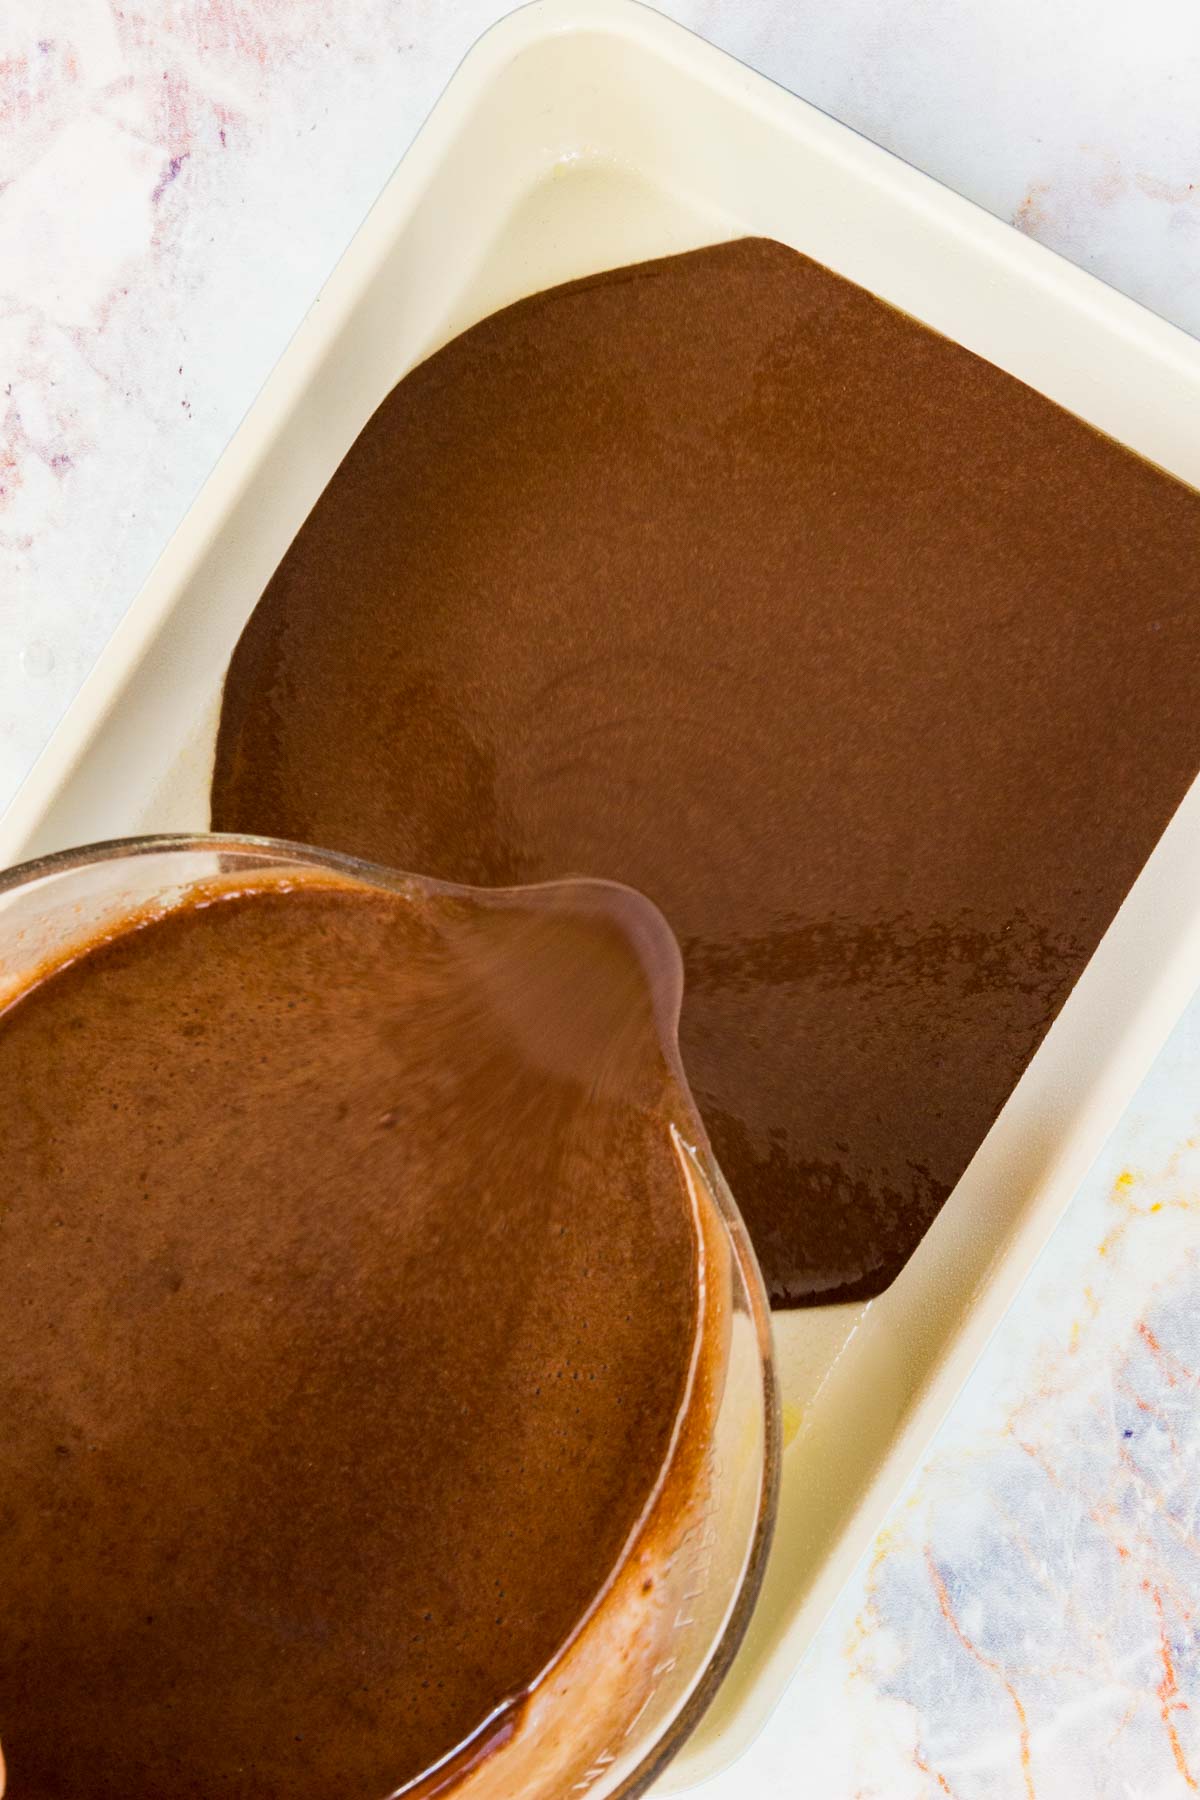 Chocolate cake batter is poured into a rectangular baking pan.